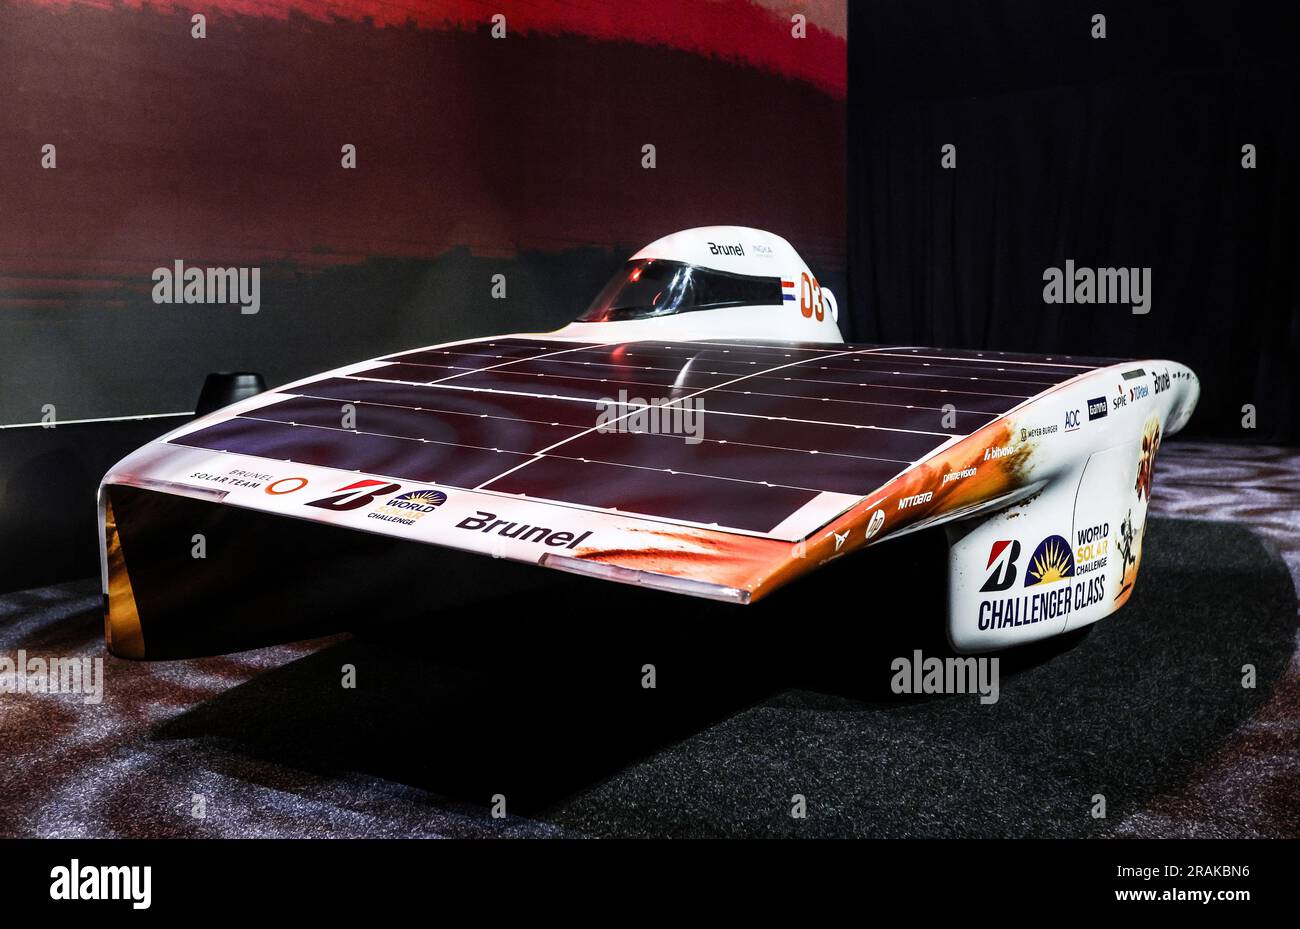 AMSTERDAM - The Nuna 12 of the Brunel Solar Team. TU Delft students are preparing for the Bridgestone World Solar Challenge, the world championship for solar-powered cars in Australia. ANP EVA PLEVIER netherlands out - belgium out Stock Photo